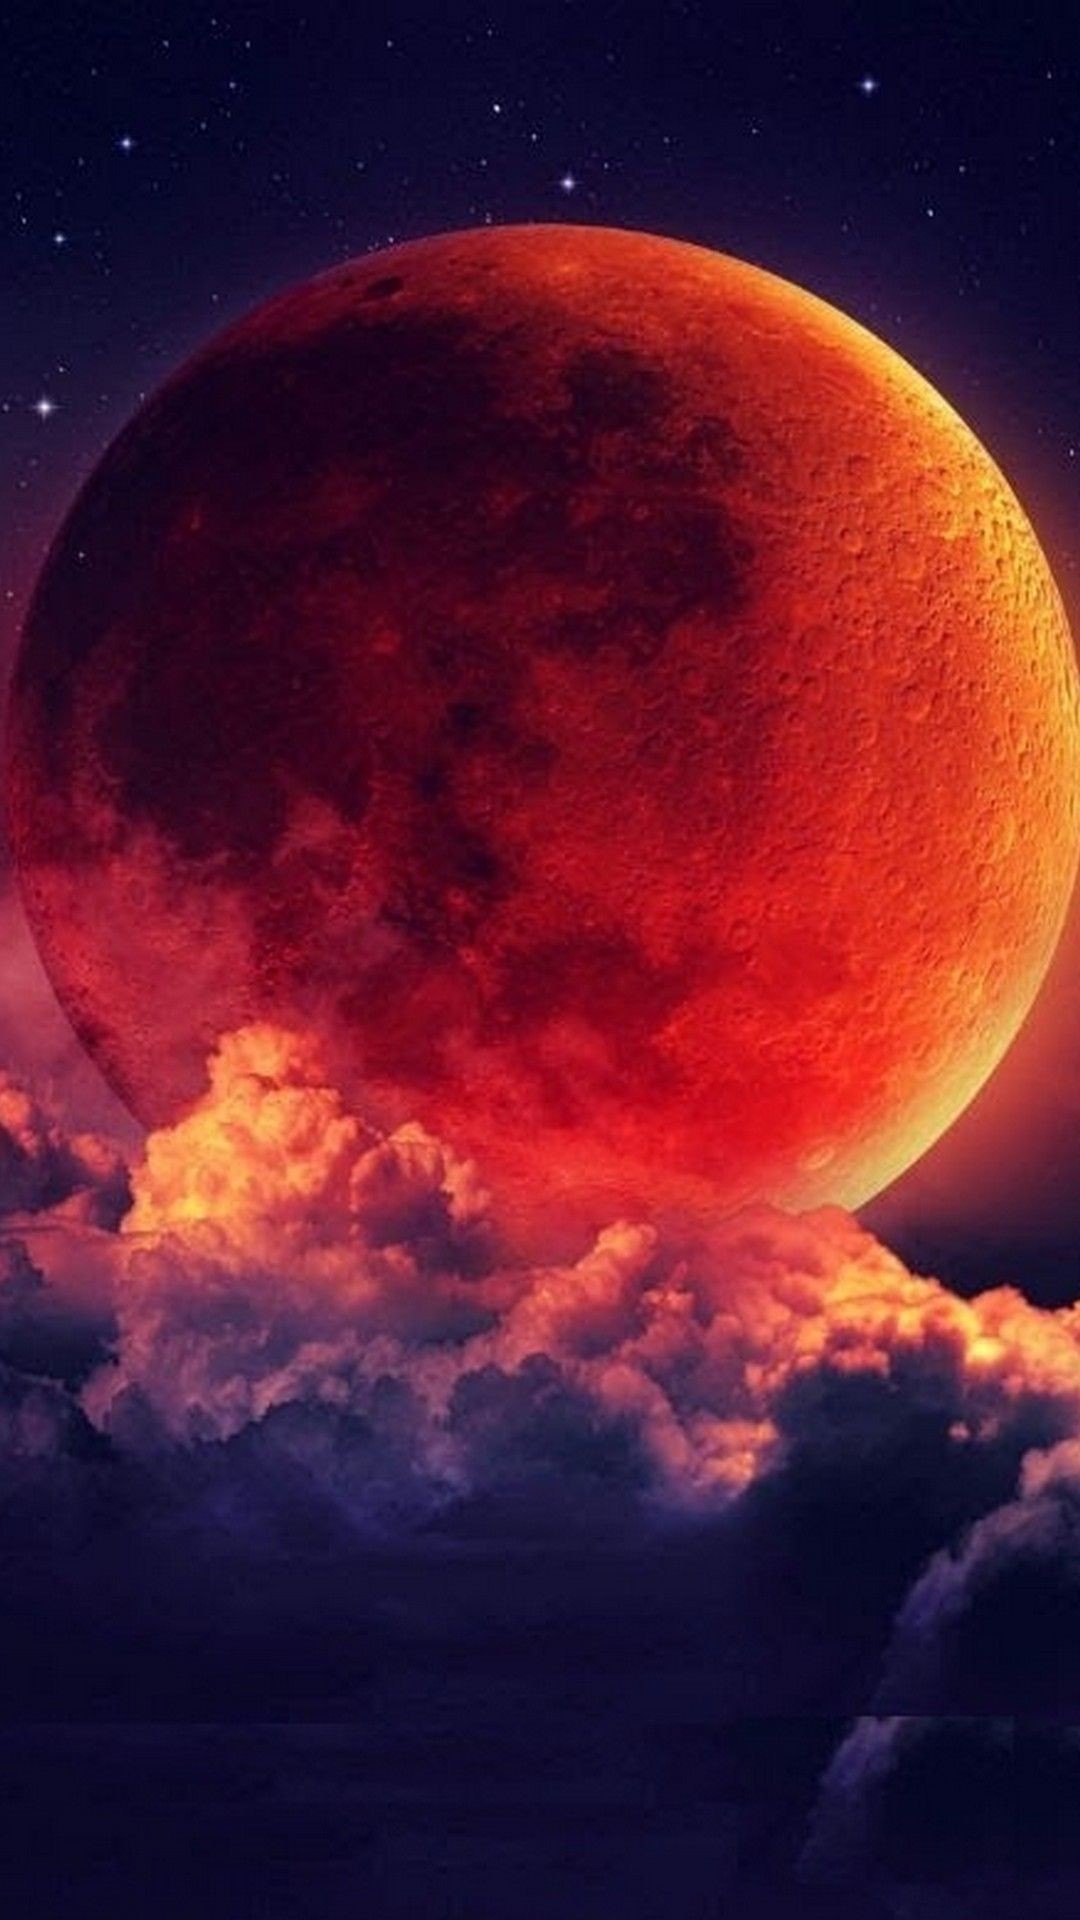 Red Moon Night IPhone Wallpaper  IPhone Wallpapers  iPhone Wallpapers